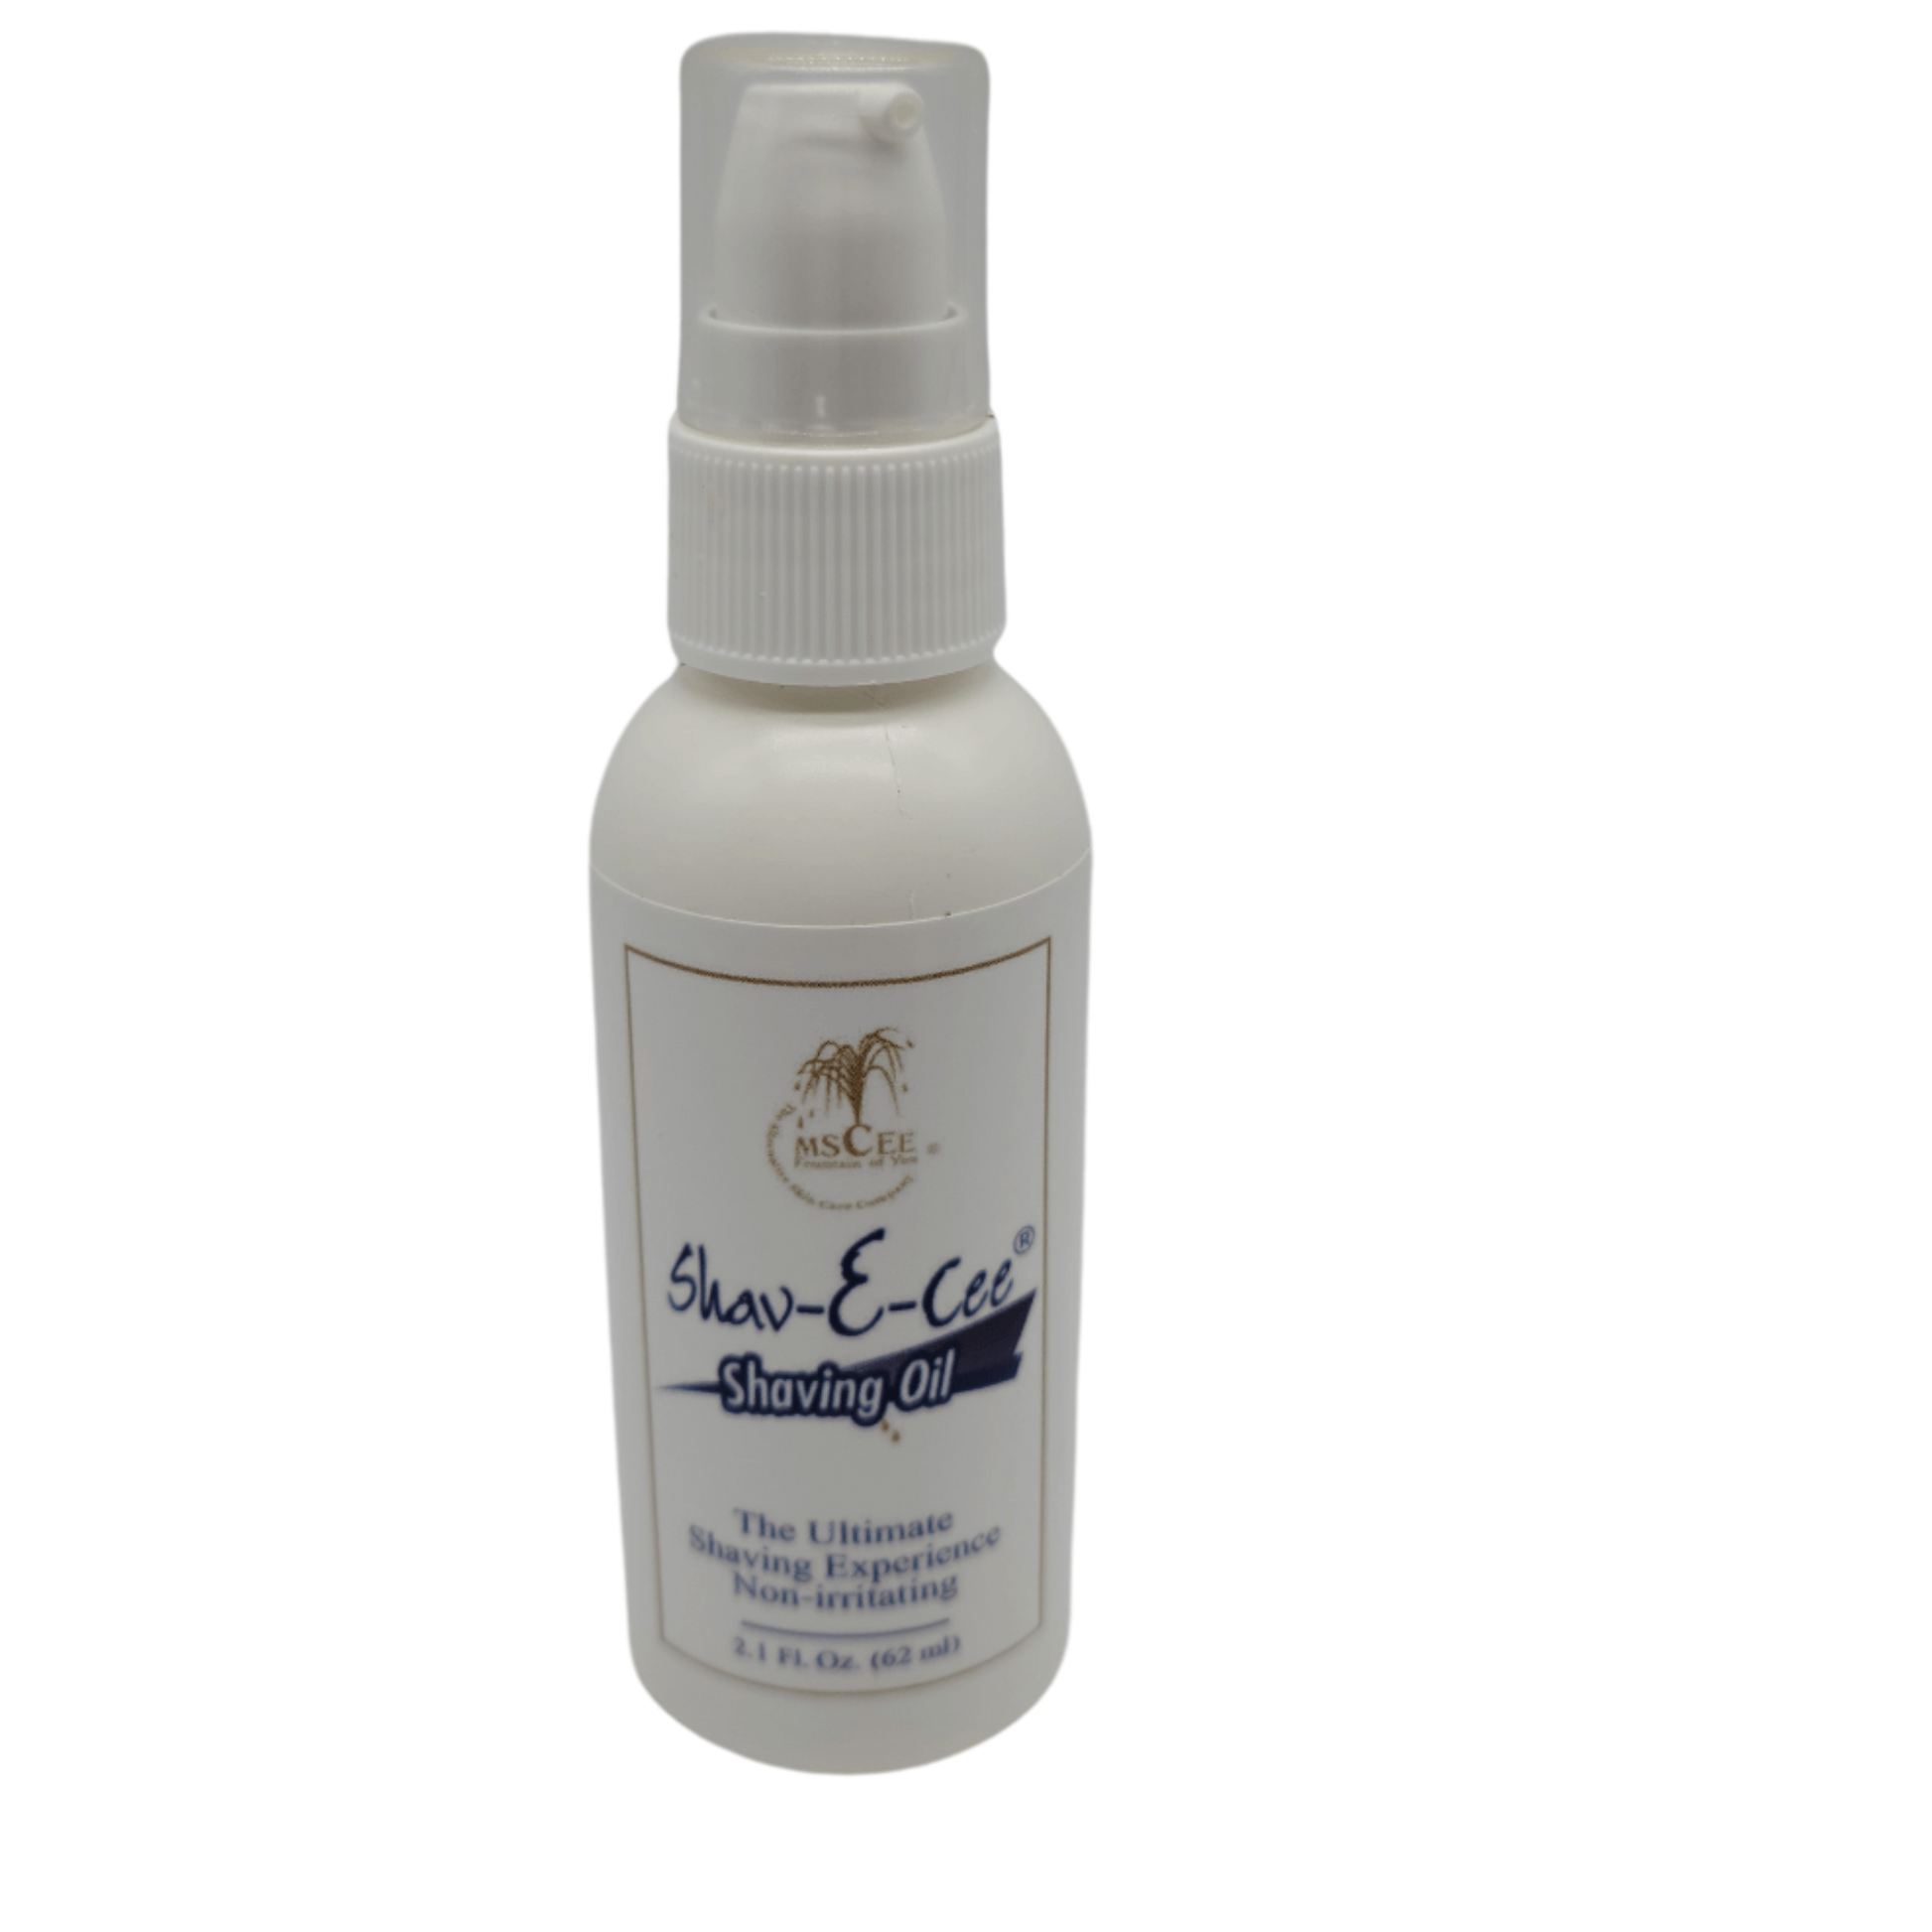 no alcohol 2 oz shave oil  use on bald heads, face,arm pits, legs, private area  anywhere to remove unwanted hair